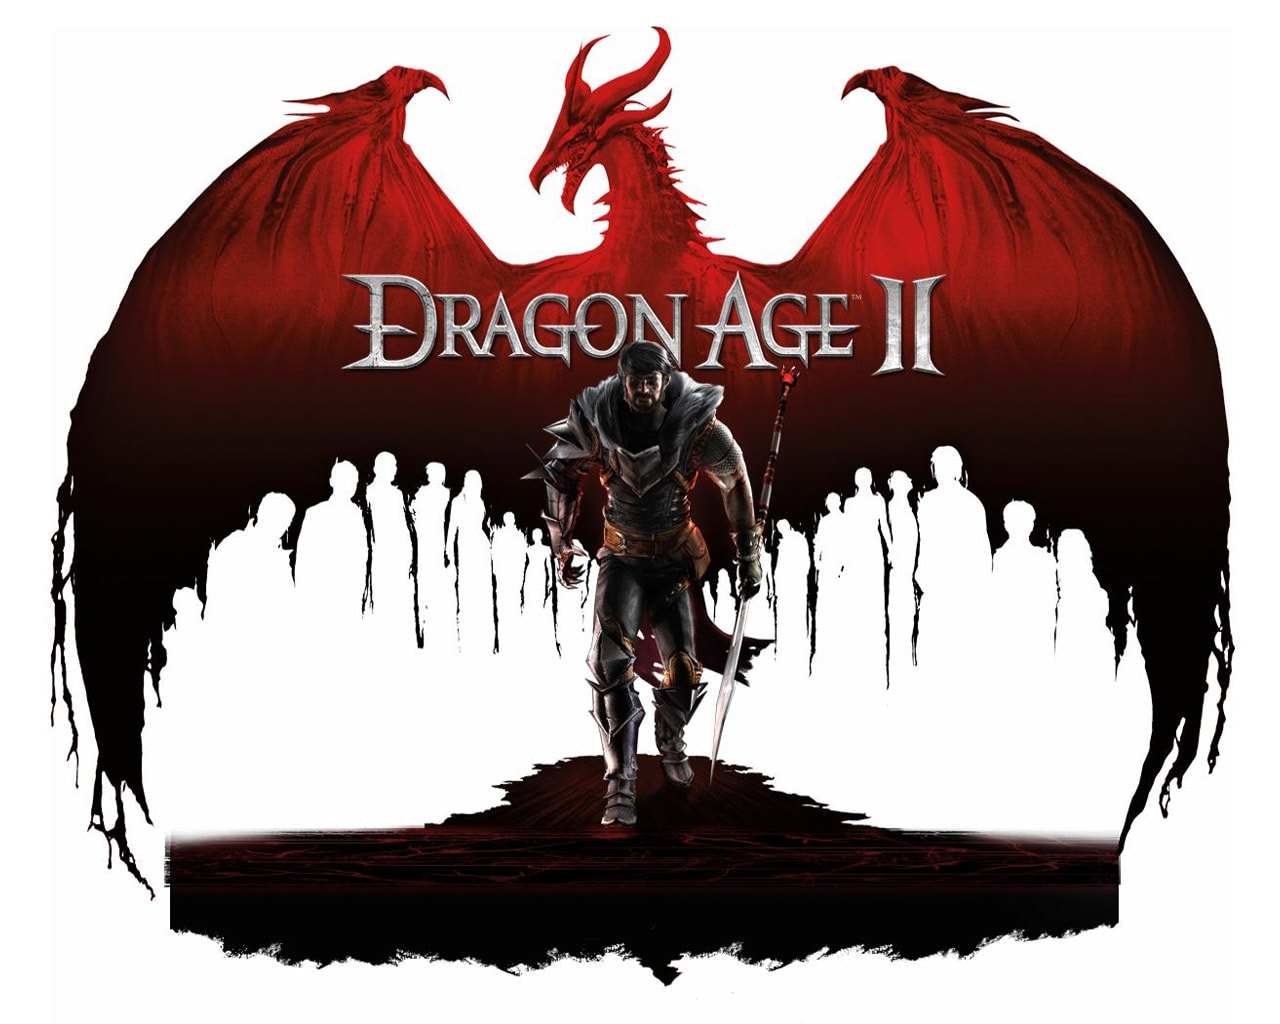 Dragon Age: Origins PC cheats, trainers, guides and walkthroughs